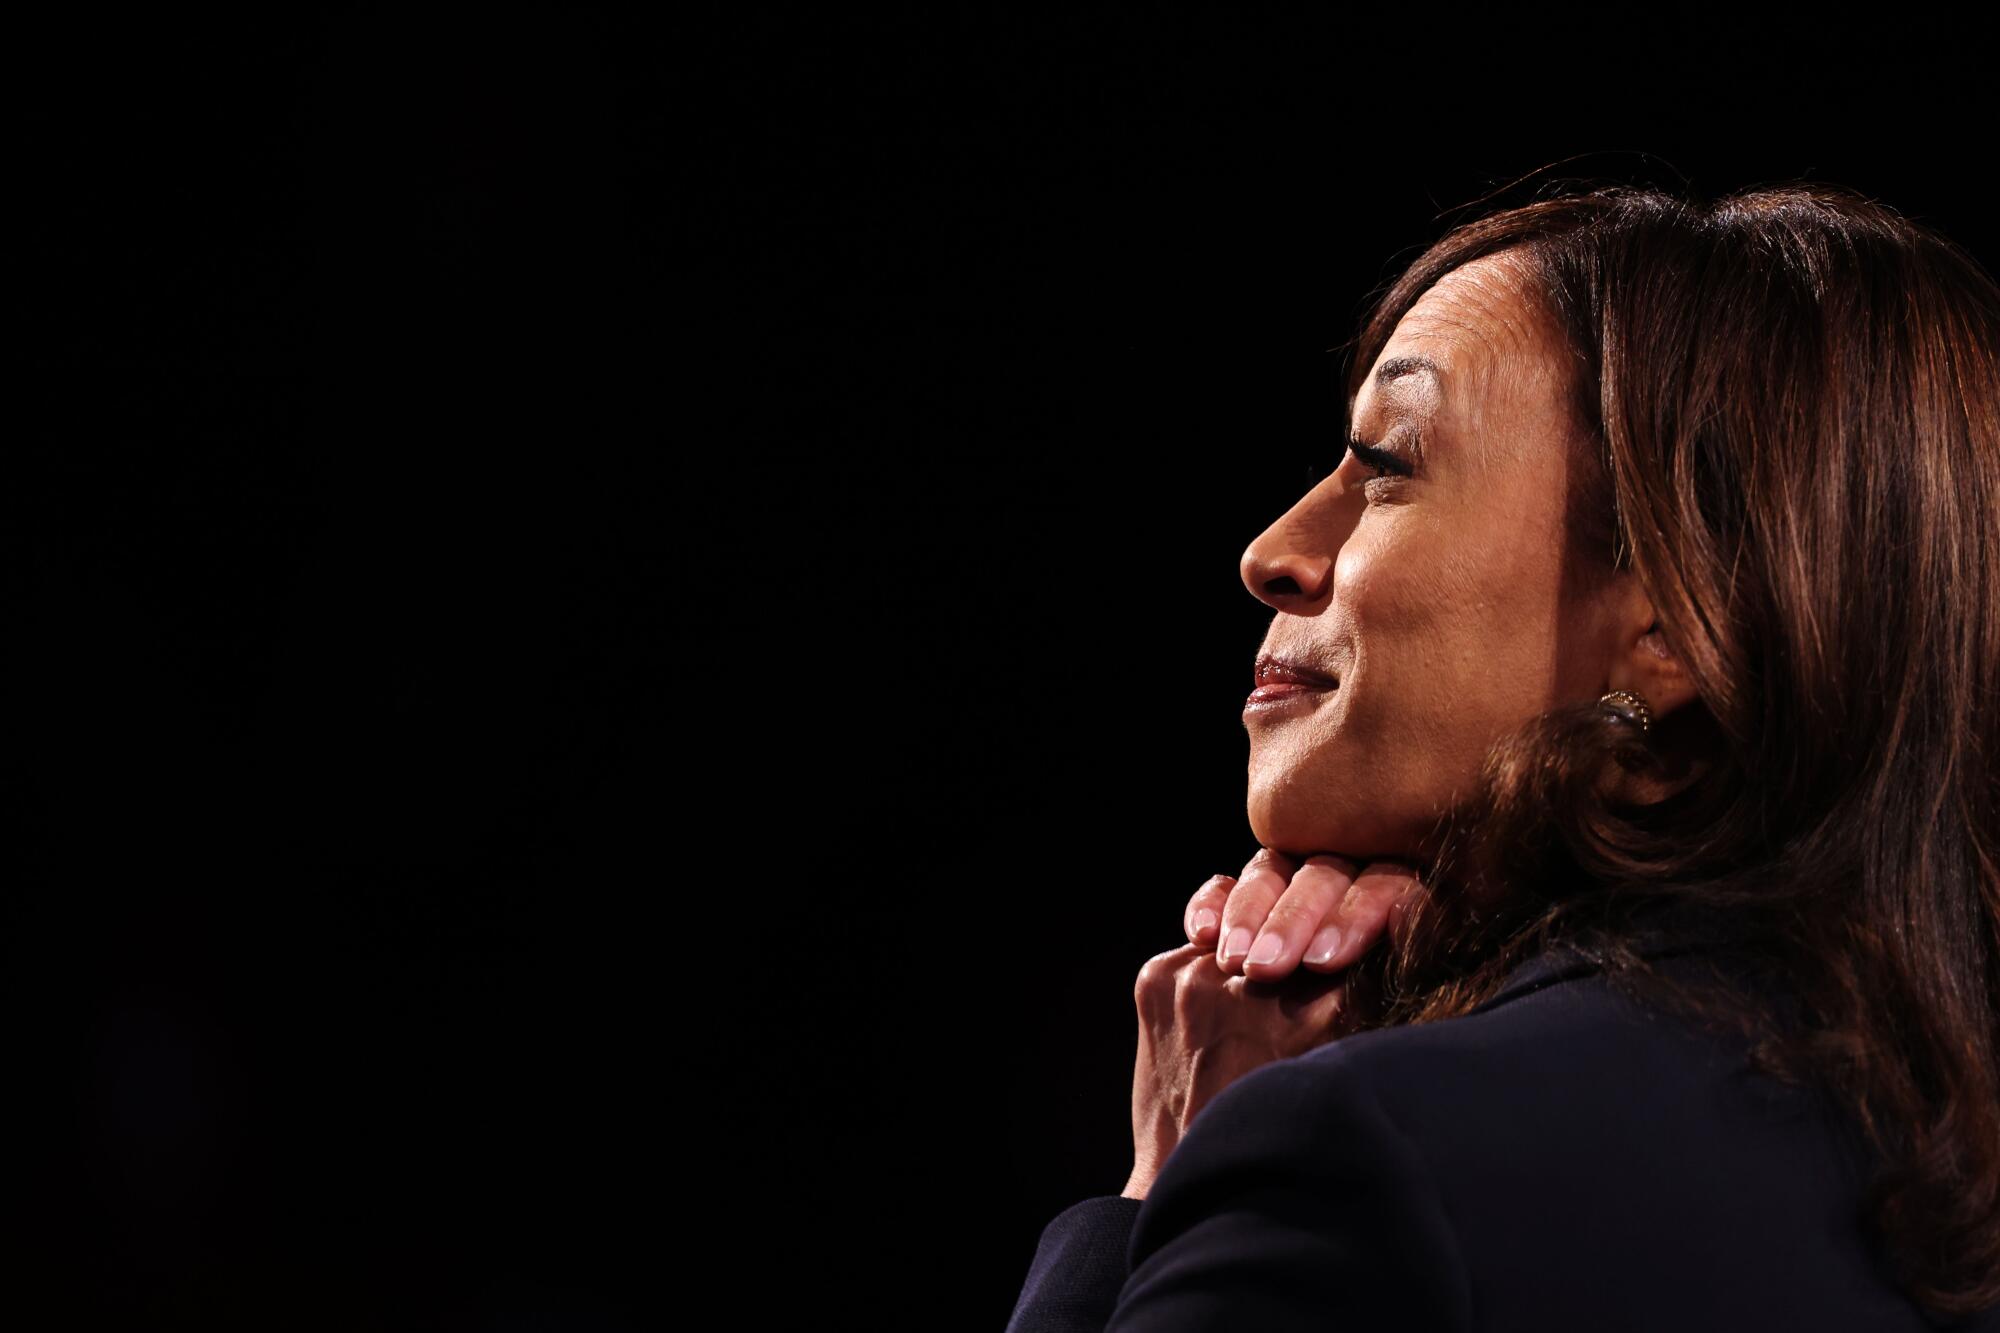 Kamala Harris smiles and places her hands under her chin